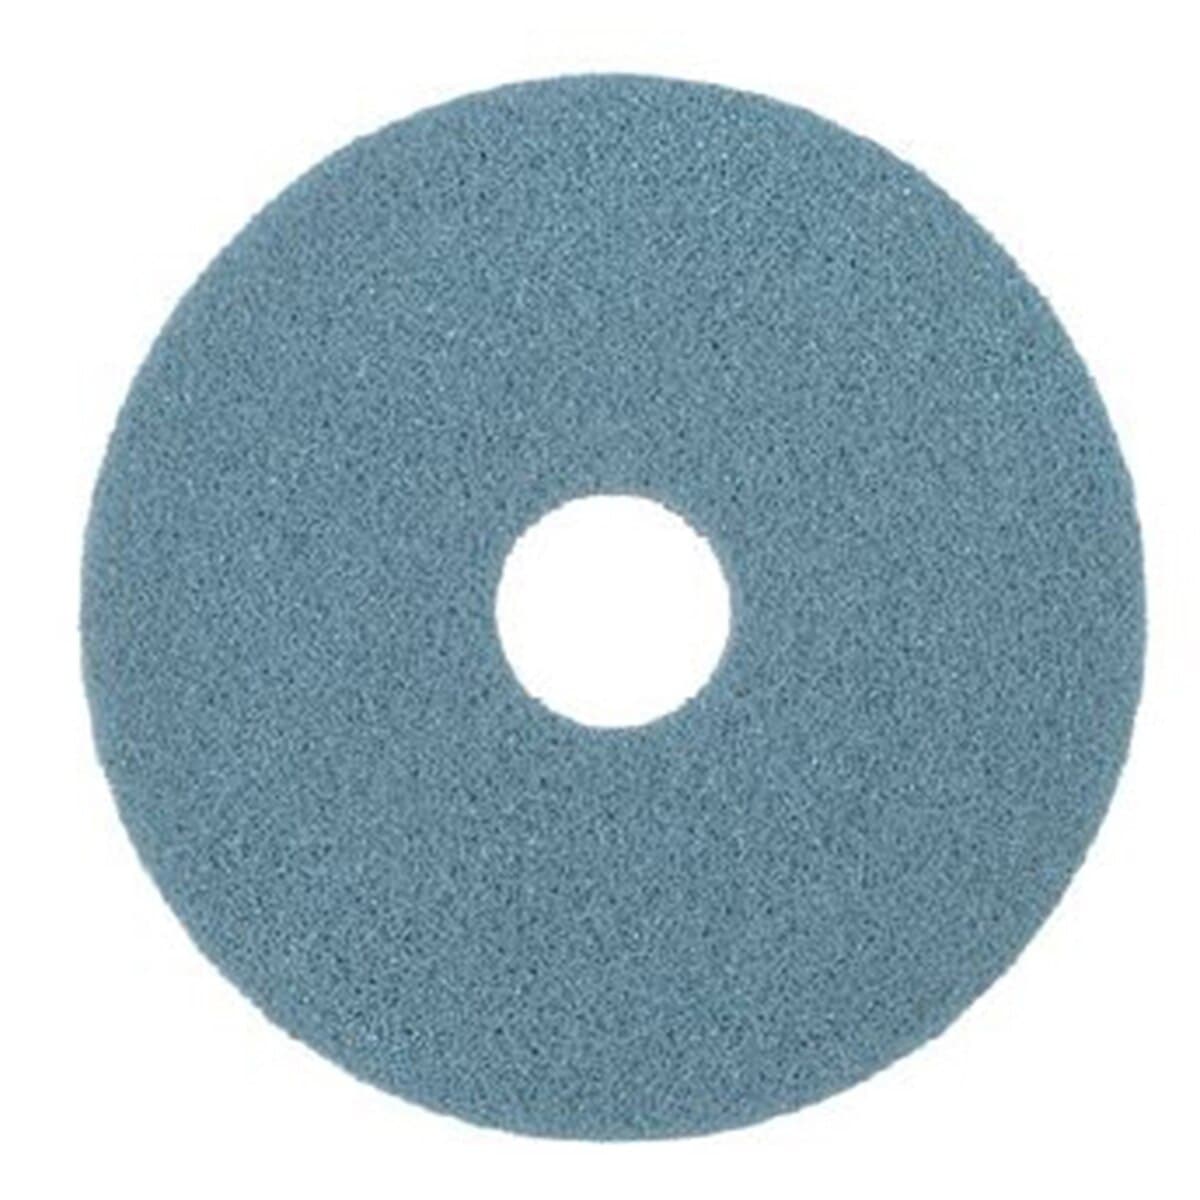 HTC Twister Pads - Blue - Twister Cleaning Technology